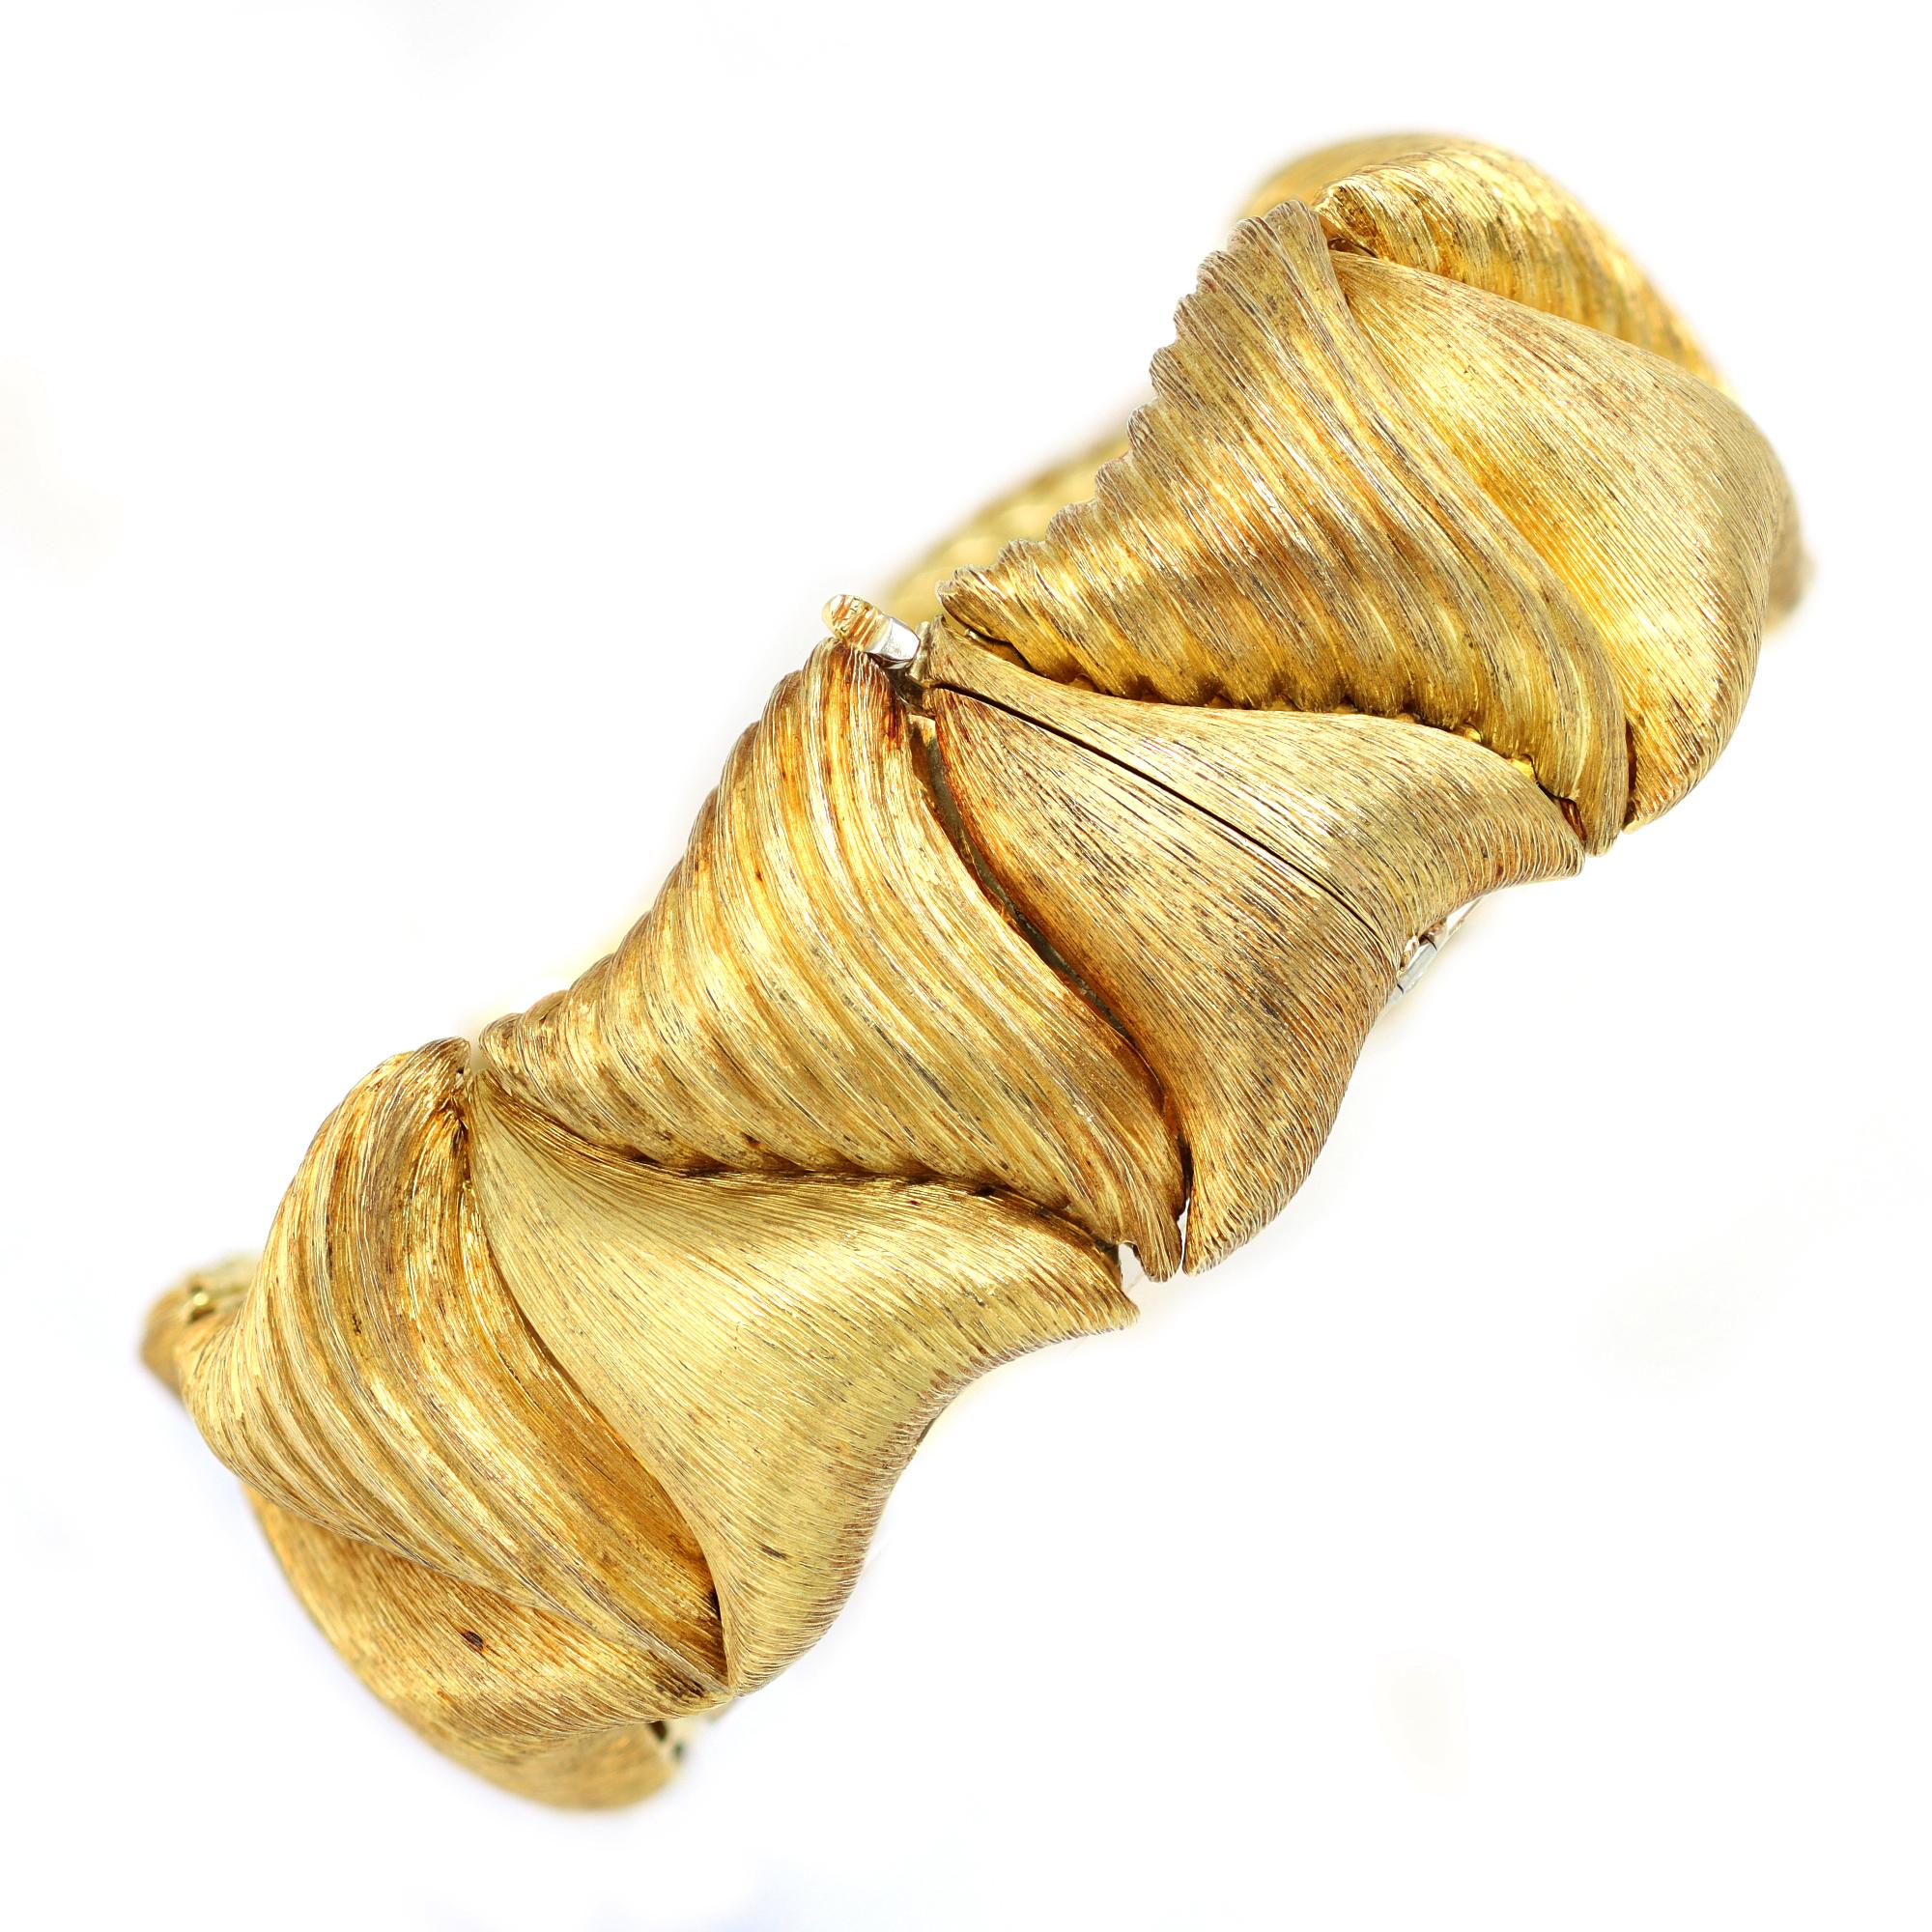 Highly sculptural textured gold link bracelet by the iconic jewelry house of Henry Dunay, designed as modified triangular yellow gold sections with alternating textures, mounted in 18-karat yellow gold. The bracelet was made circa 1970s and has a